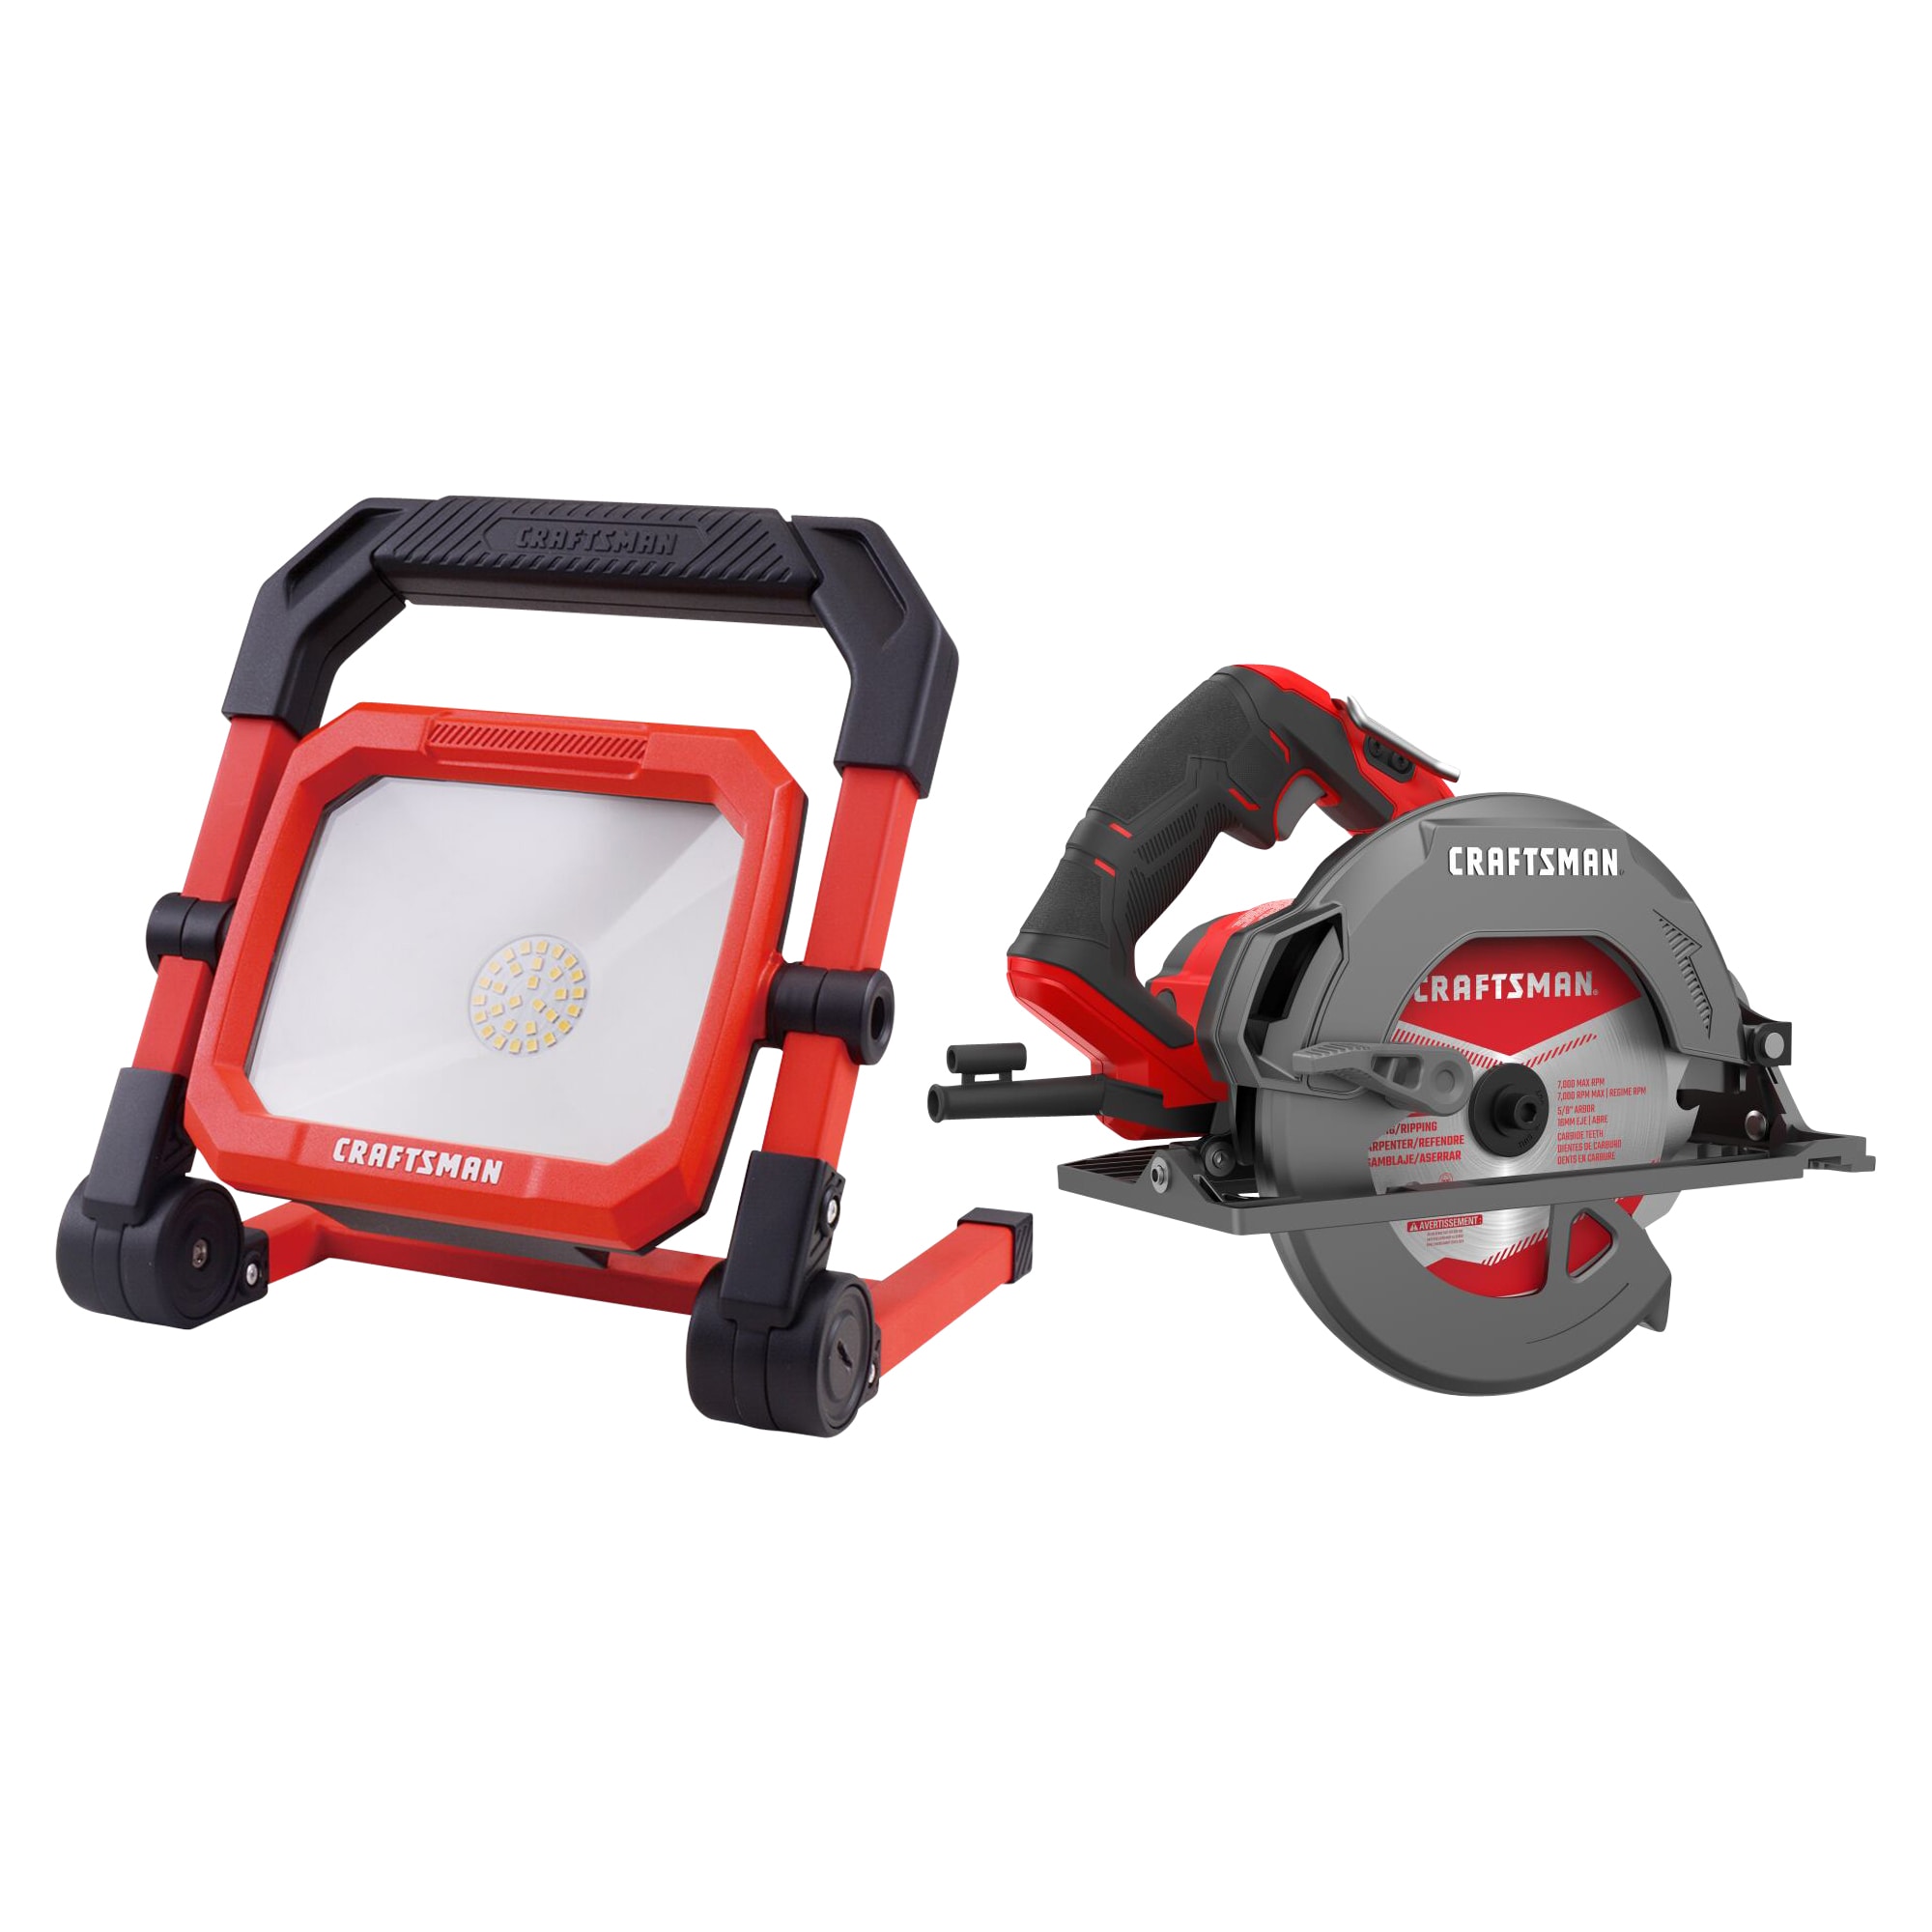 Shop CRAFTSMAN 15-Amp 7-1/4-in Corded Circular & Portable Work Light at Lowes.com